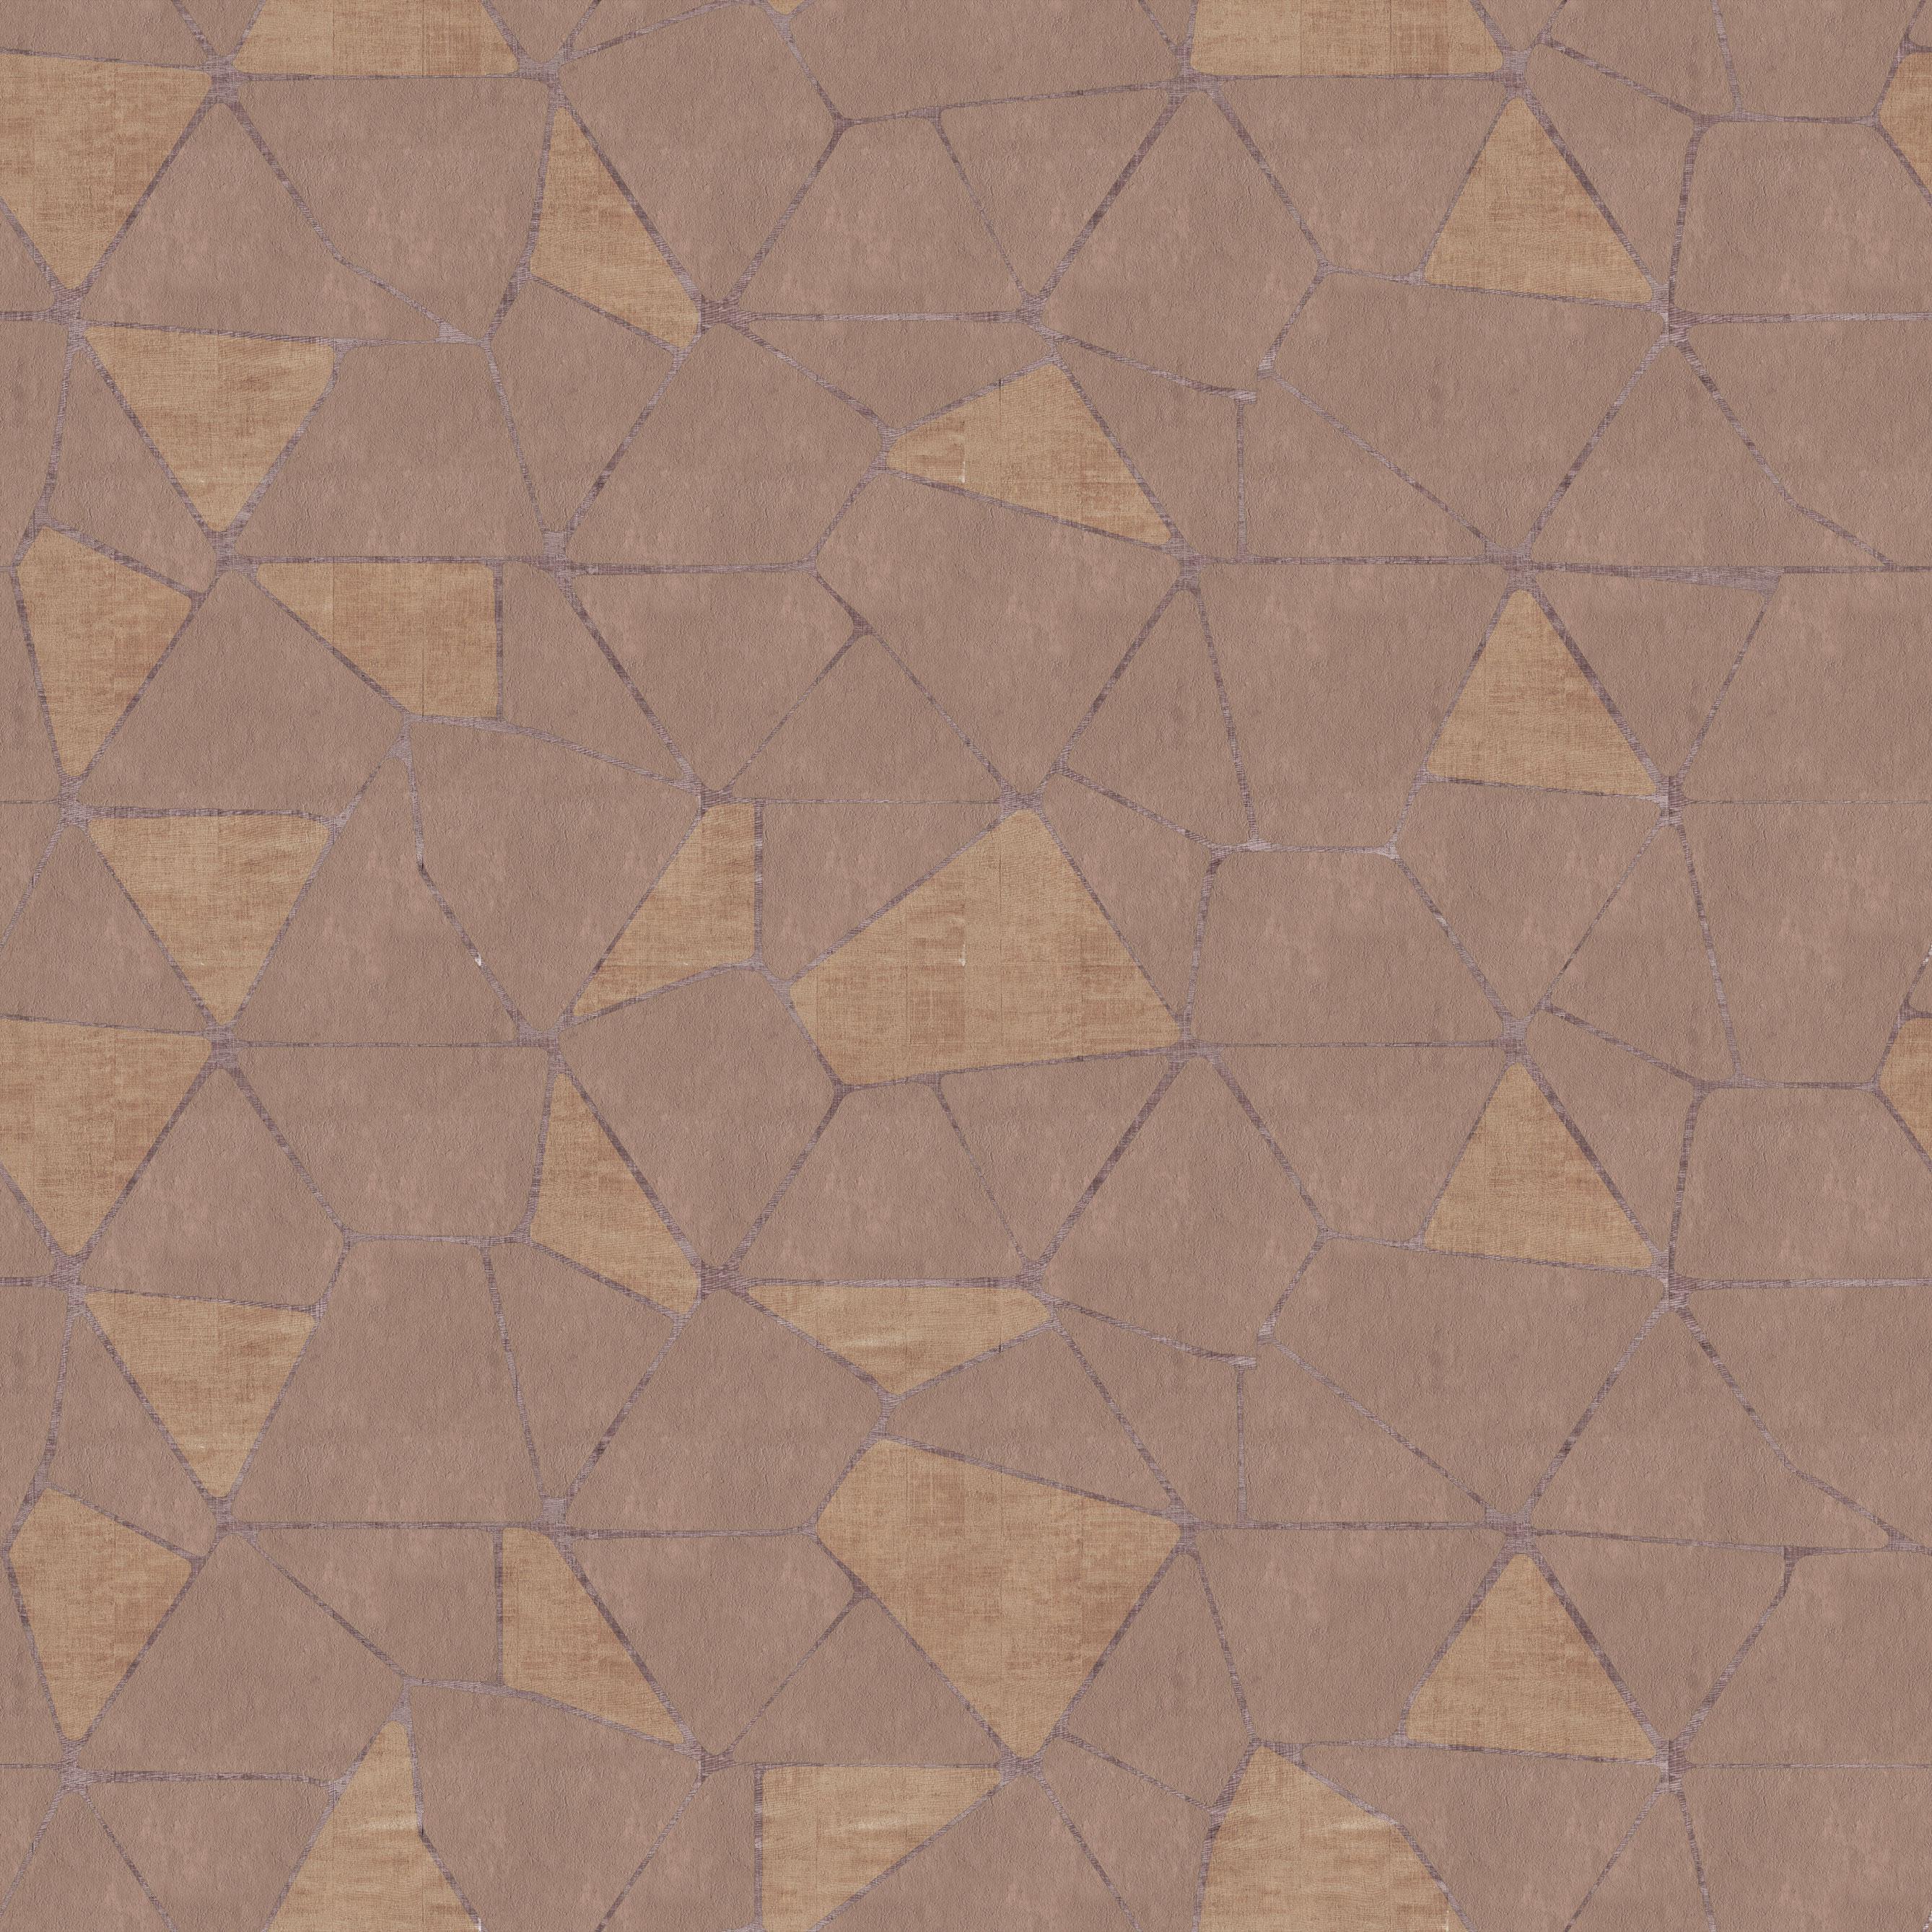 Contemporary Ornami Africa Triangles Pattern Vinyl Wallpaper Made in Italy Digital Printing For Sale